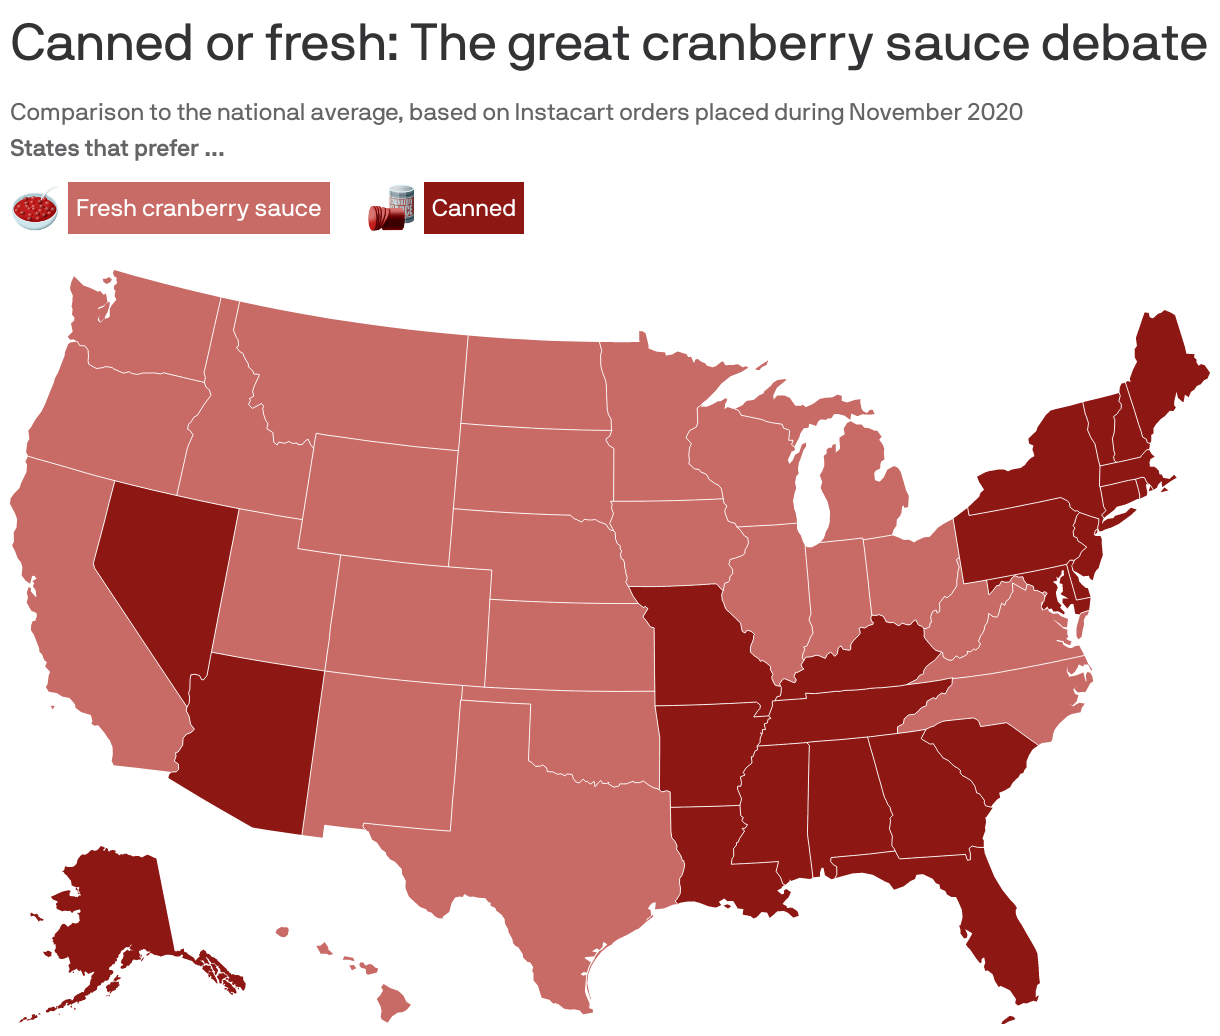 Canned or fresh: The great cranberry sauce debate